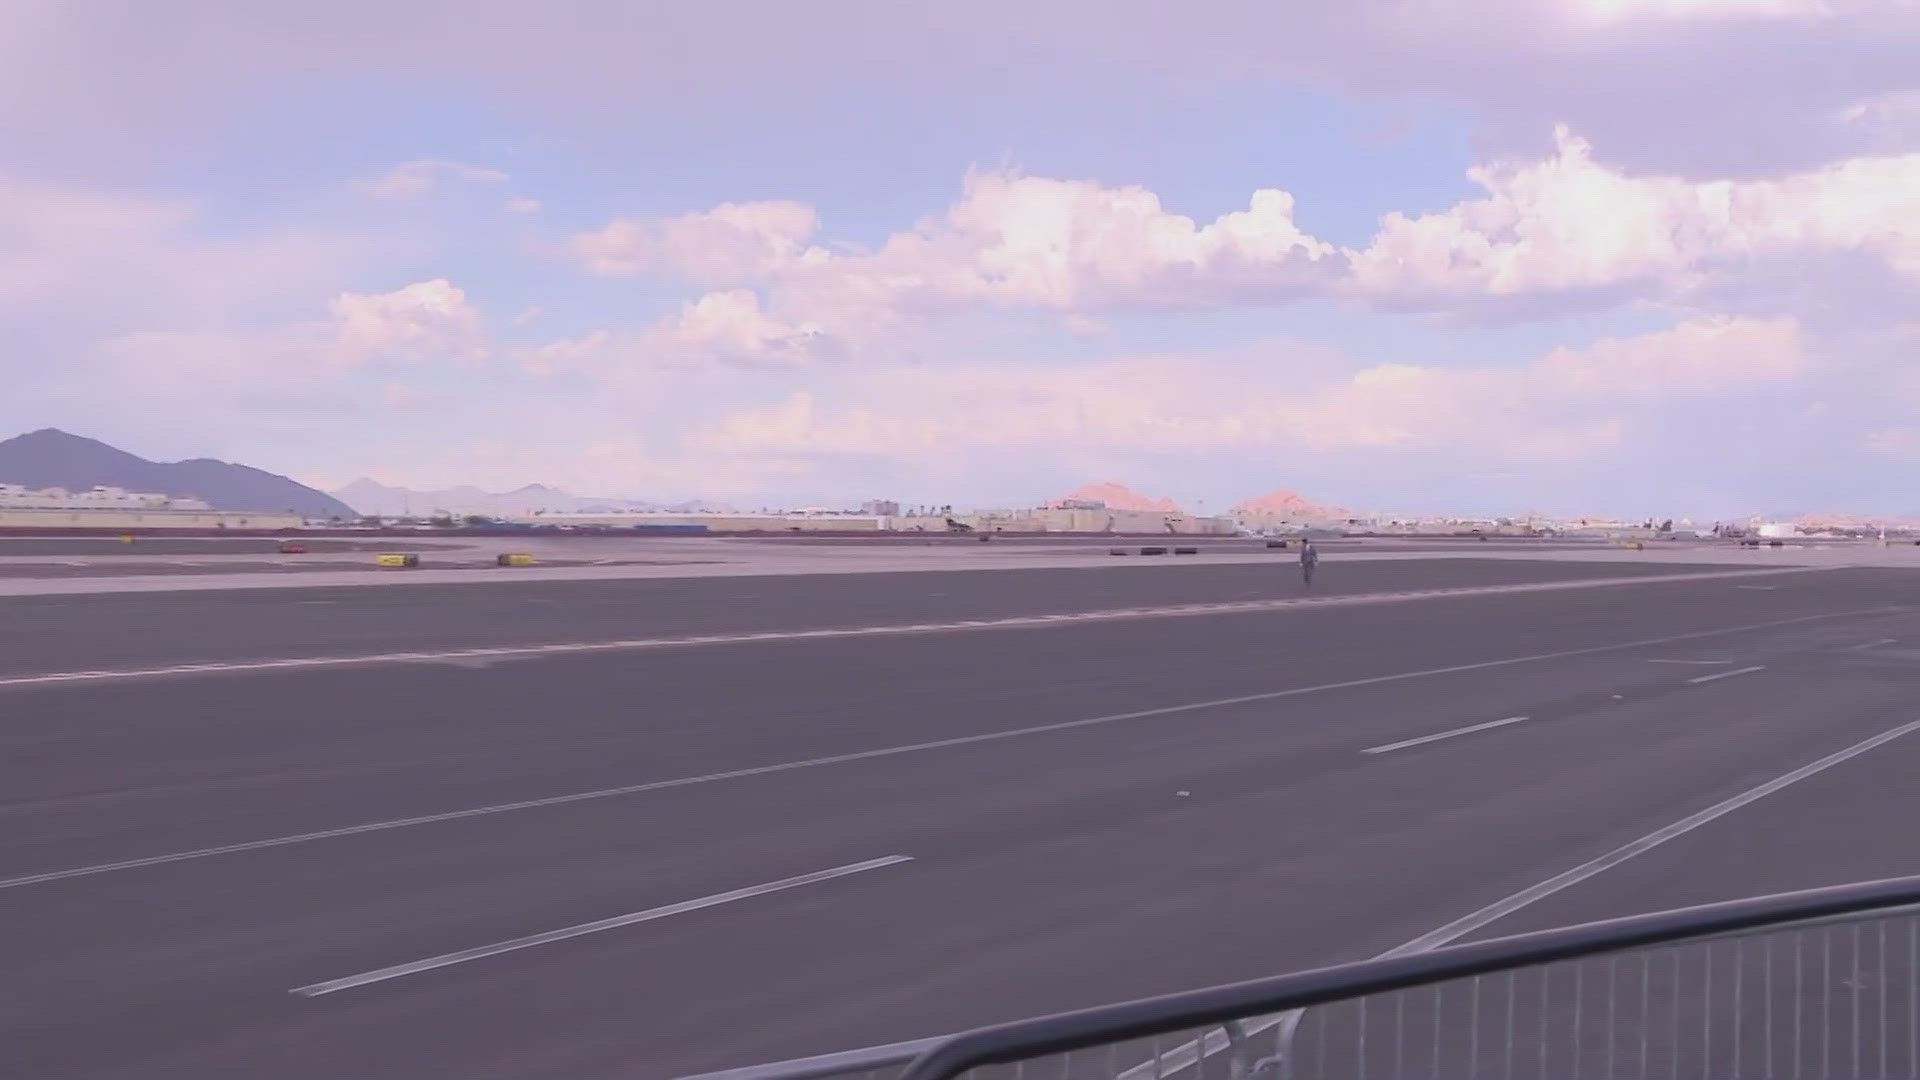 The President is expected to make an early arrival at Sky Harbor airport in Phoenix.